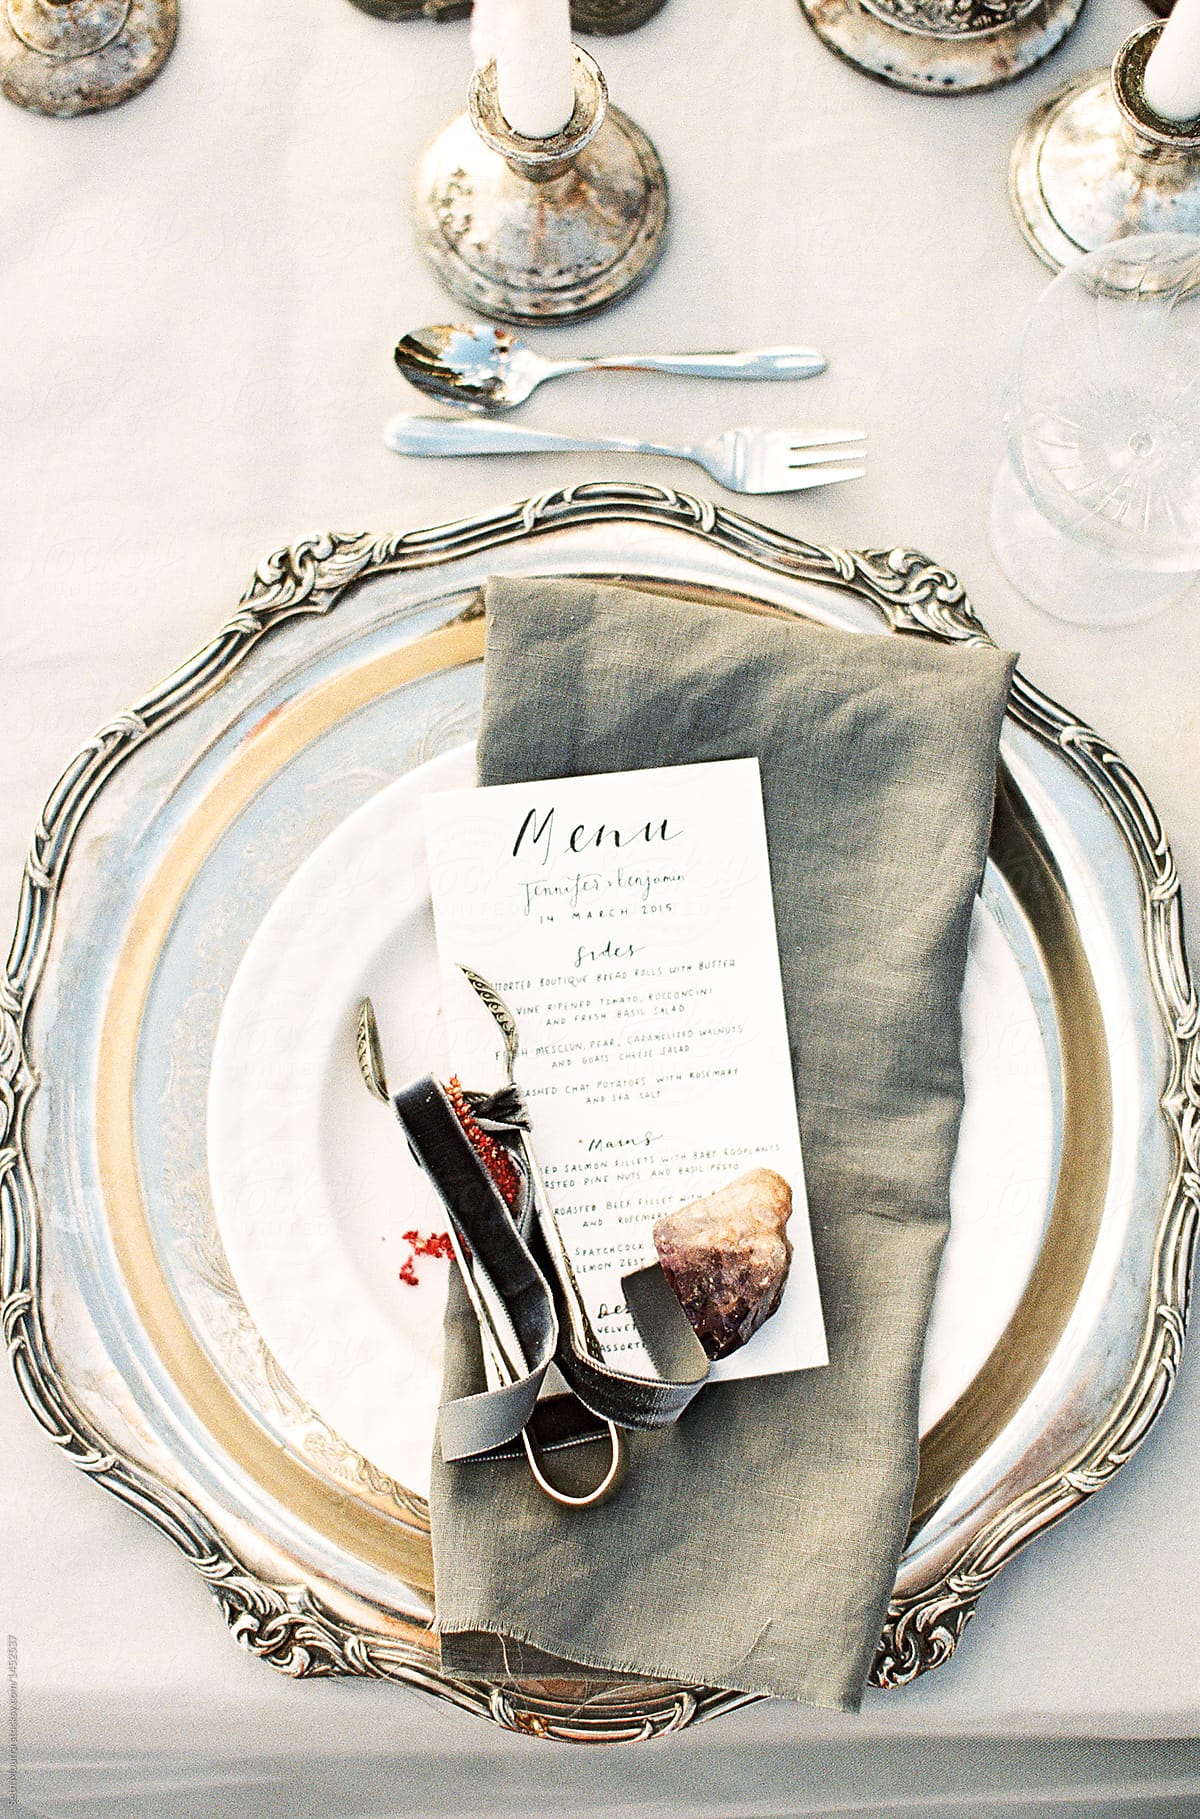 Silver Place Setting